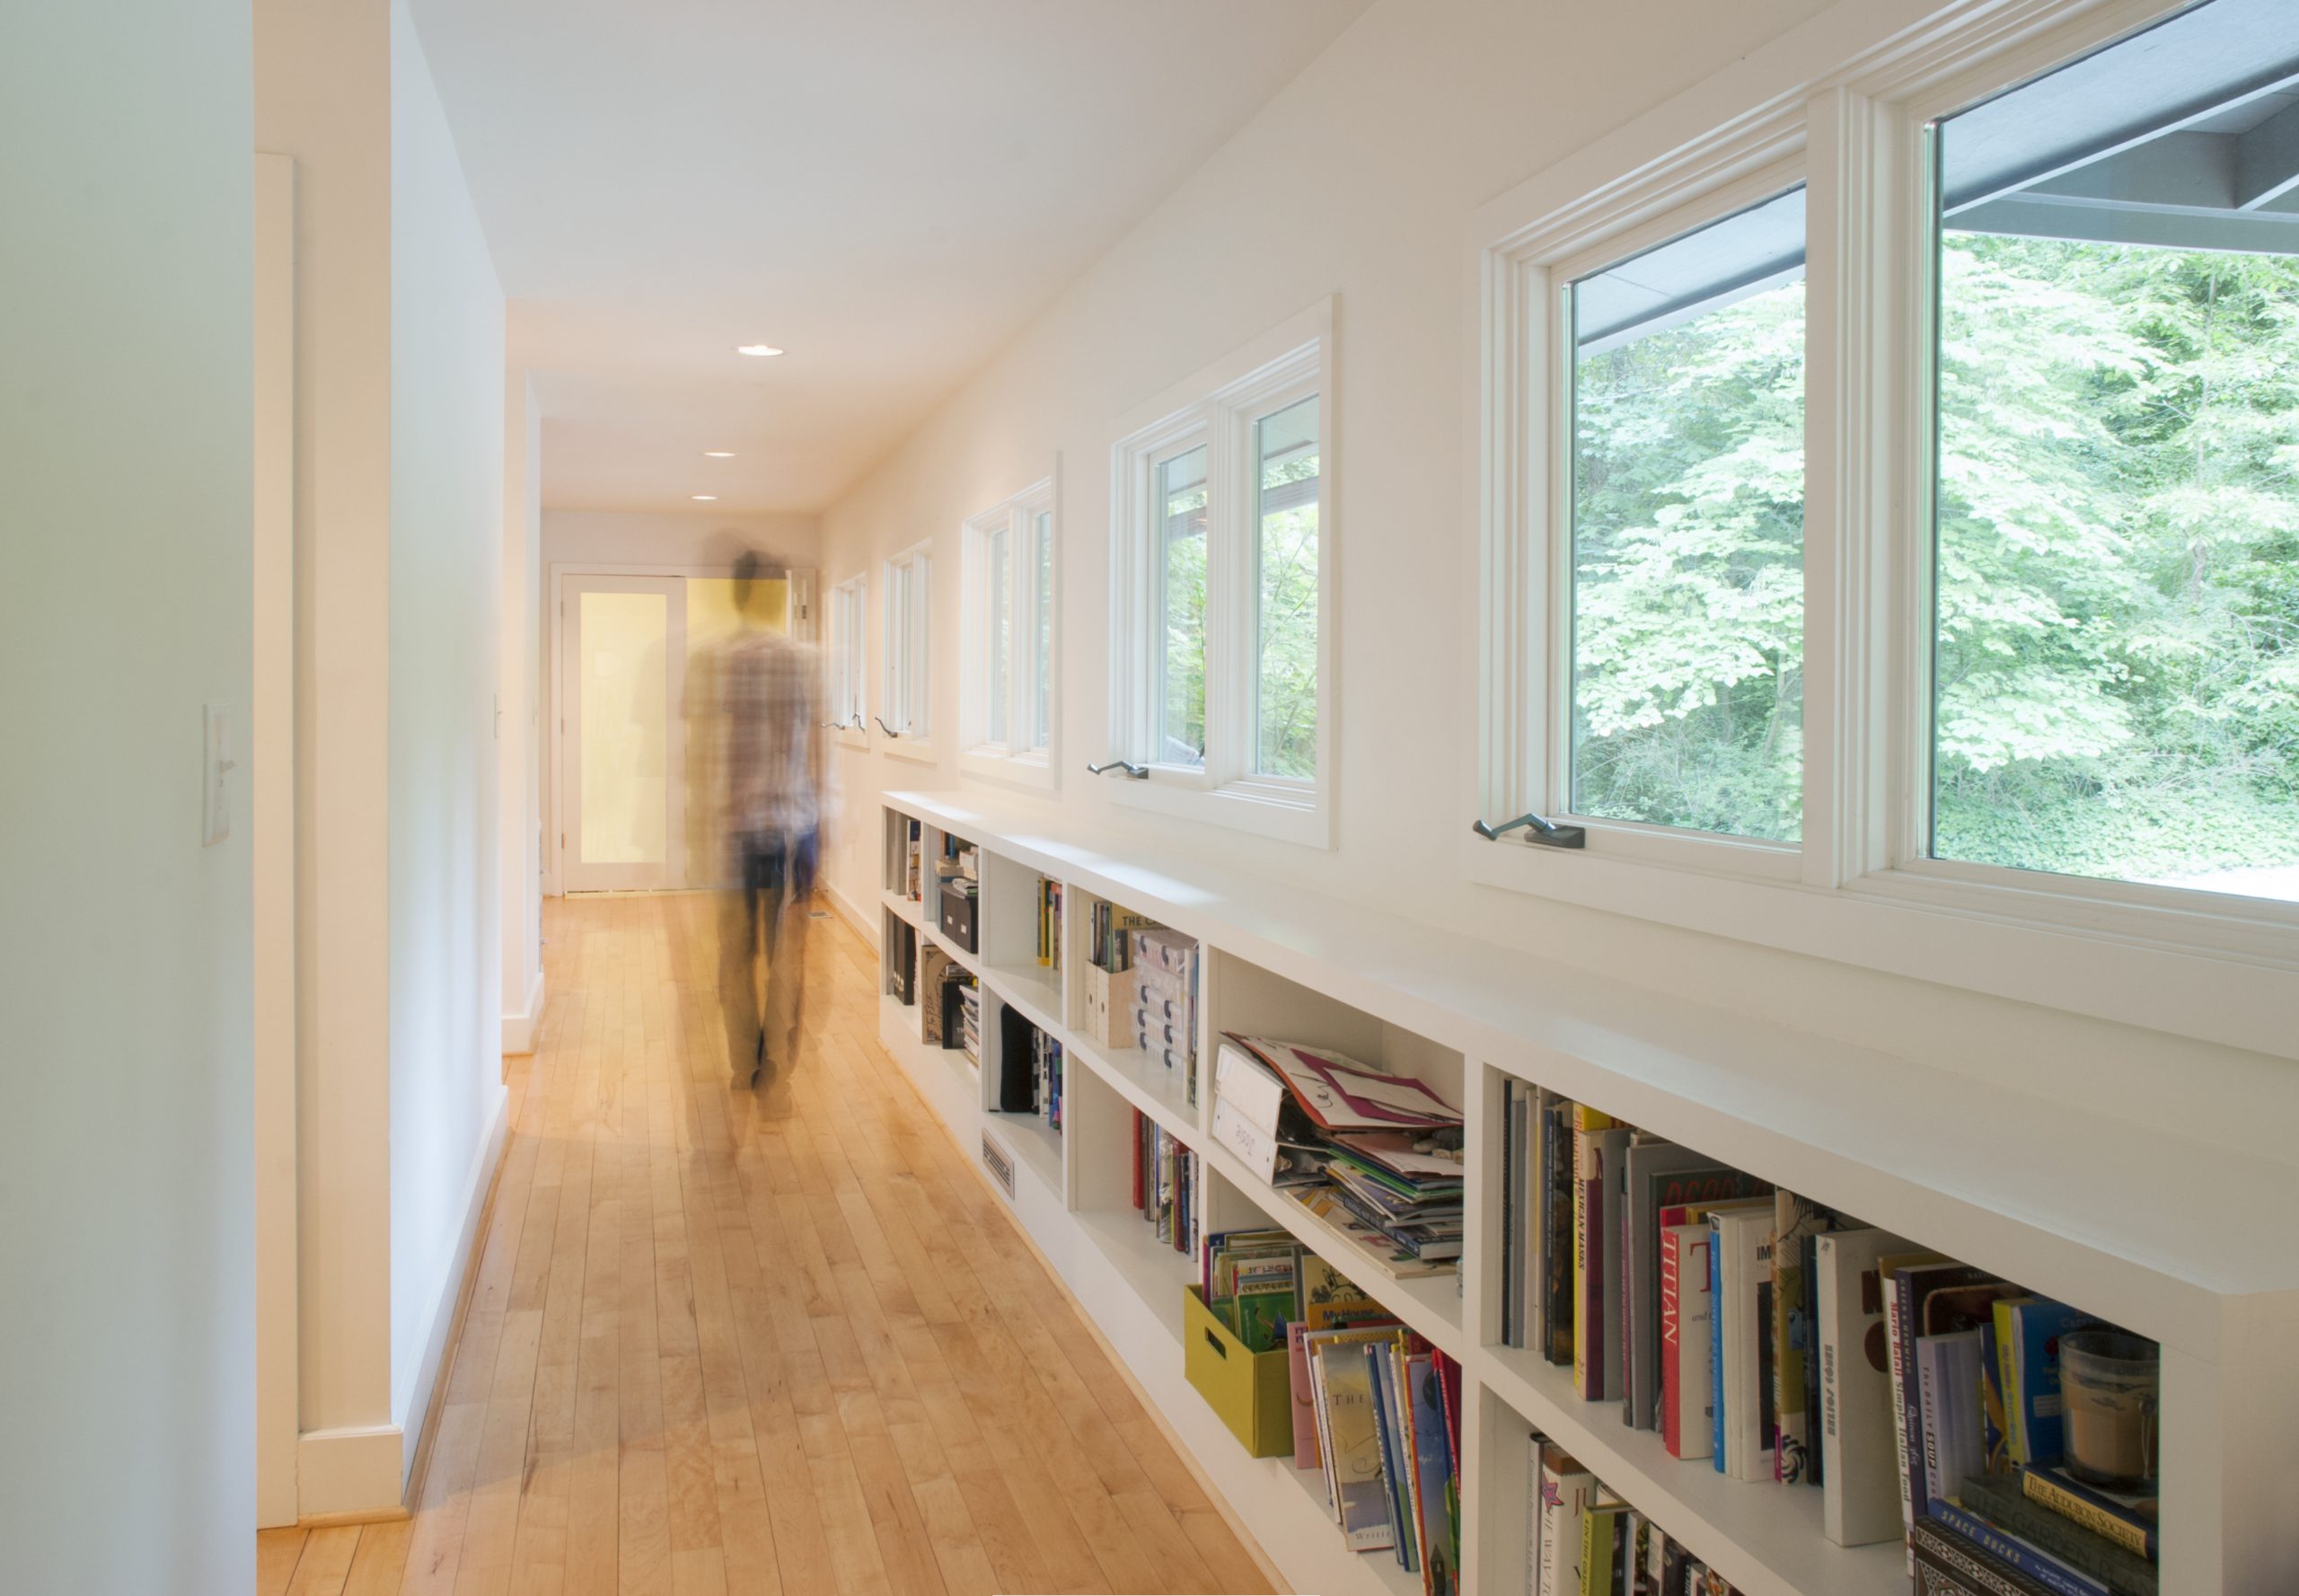 A person walks down a hallway lined with windows and low built-in bookshelves